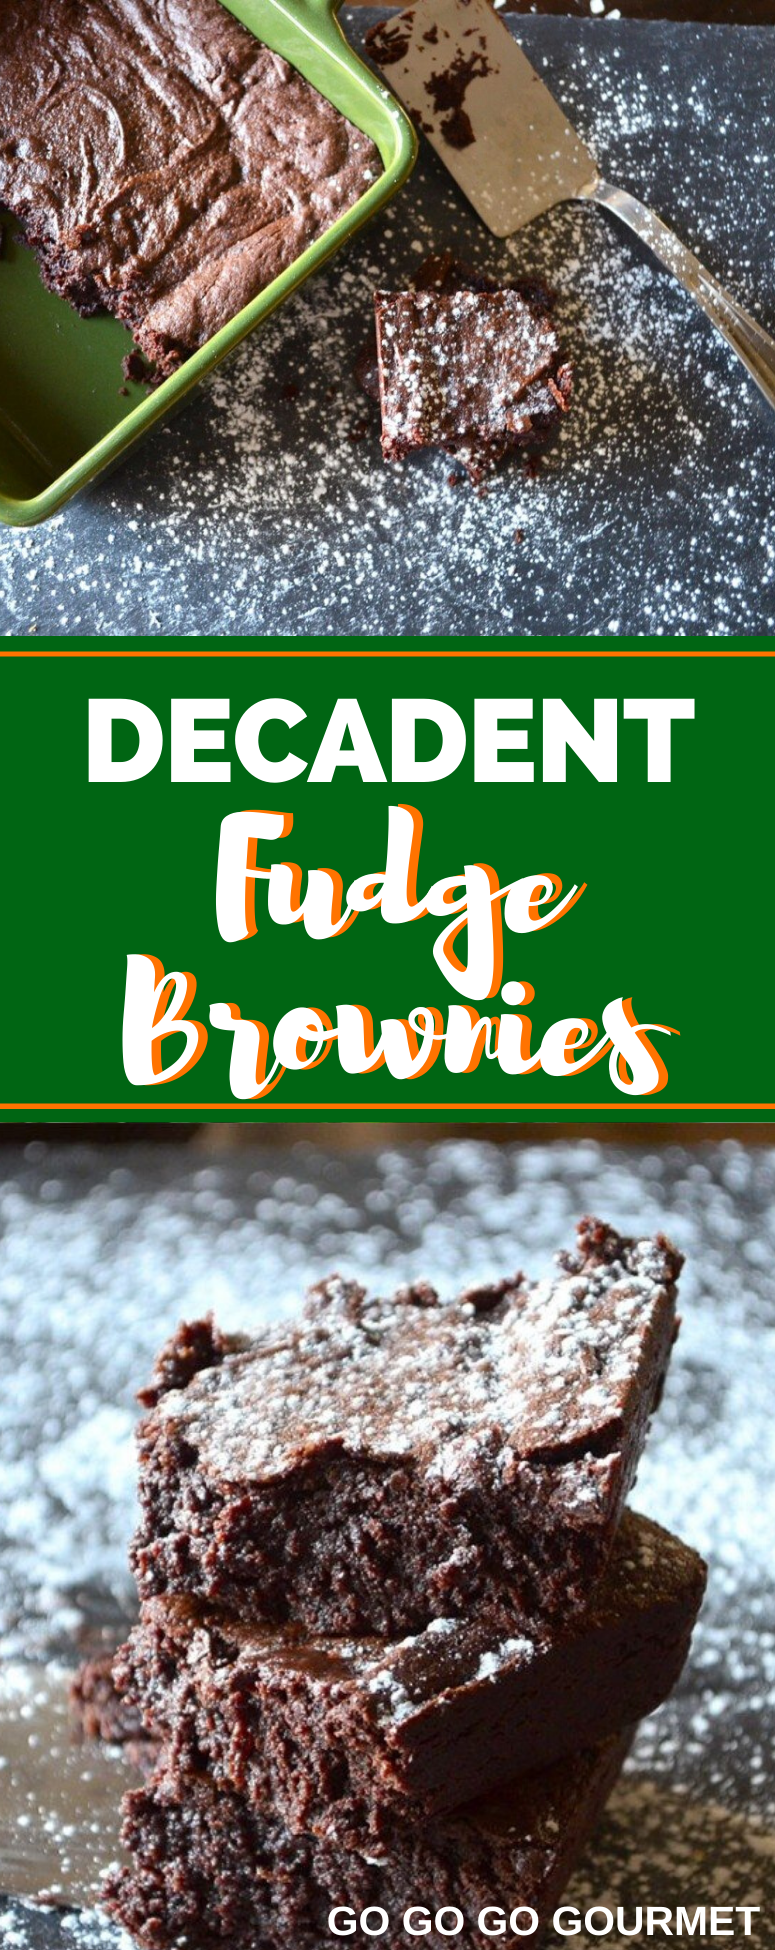 Forget the box mix, these easy homemade Fudge Brownies are made from scratch! They are chewy, gooey and totally decadent and delicious. You won't find a better brownie recipe than these! #gogogogourmet #fudgebrownies #homemadebrownies #browniesrecipe via @gogogogourmet